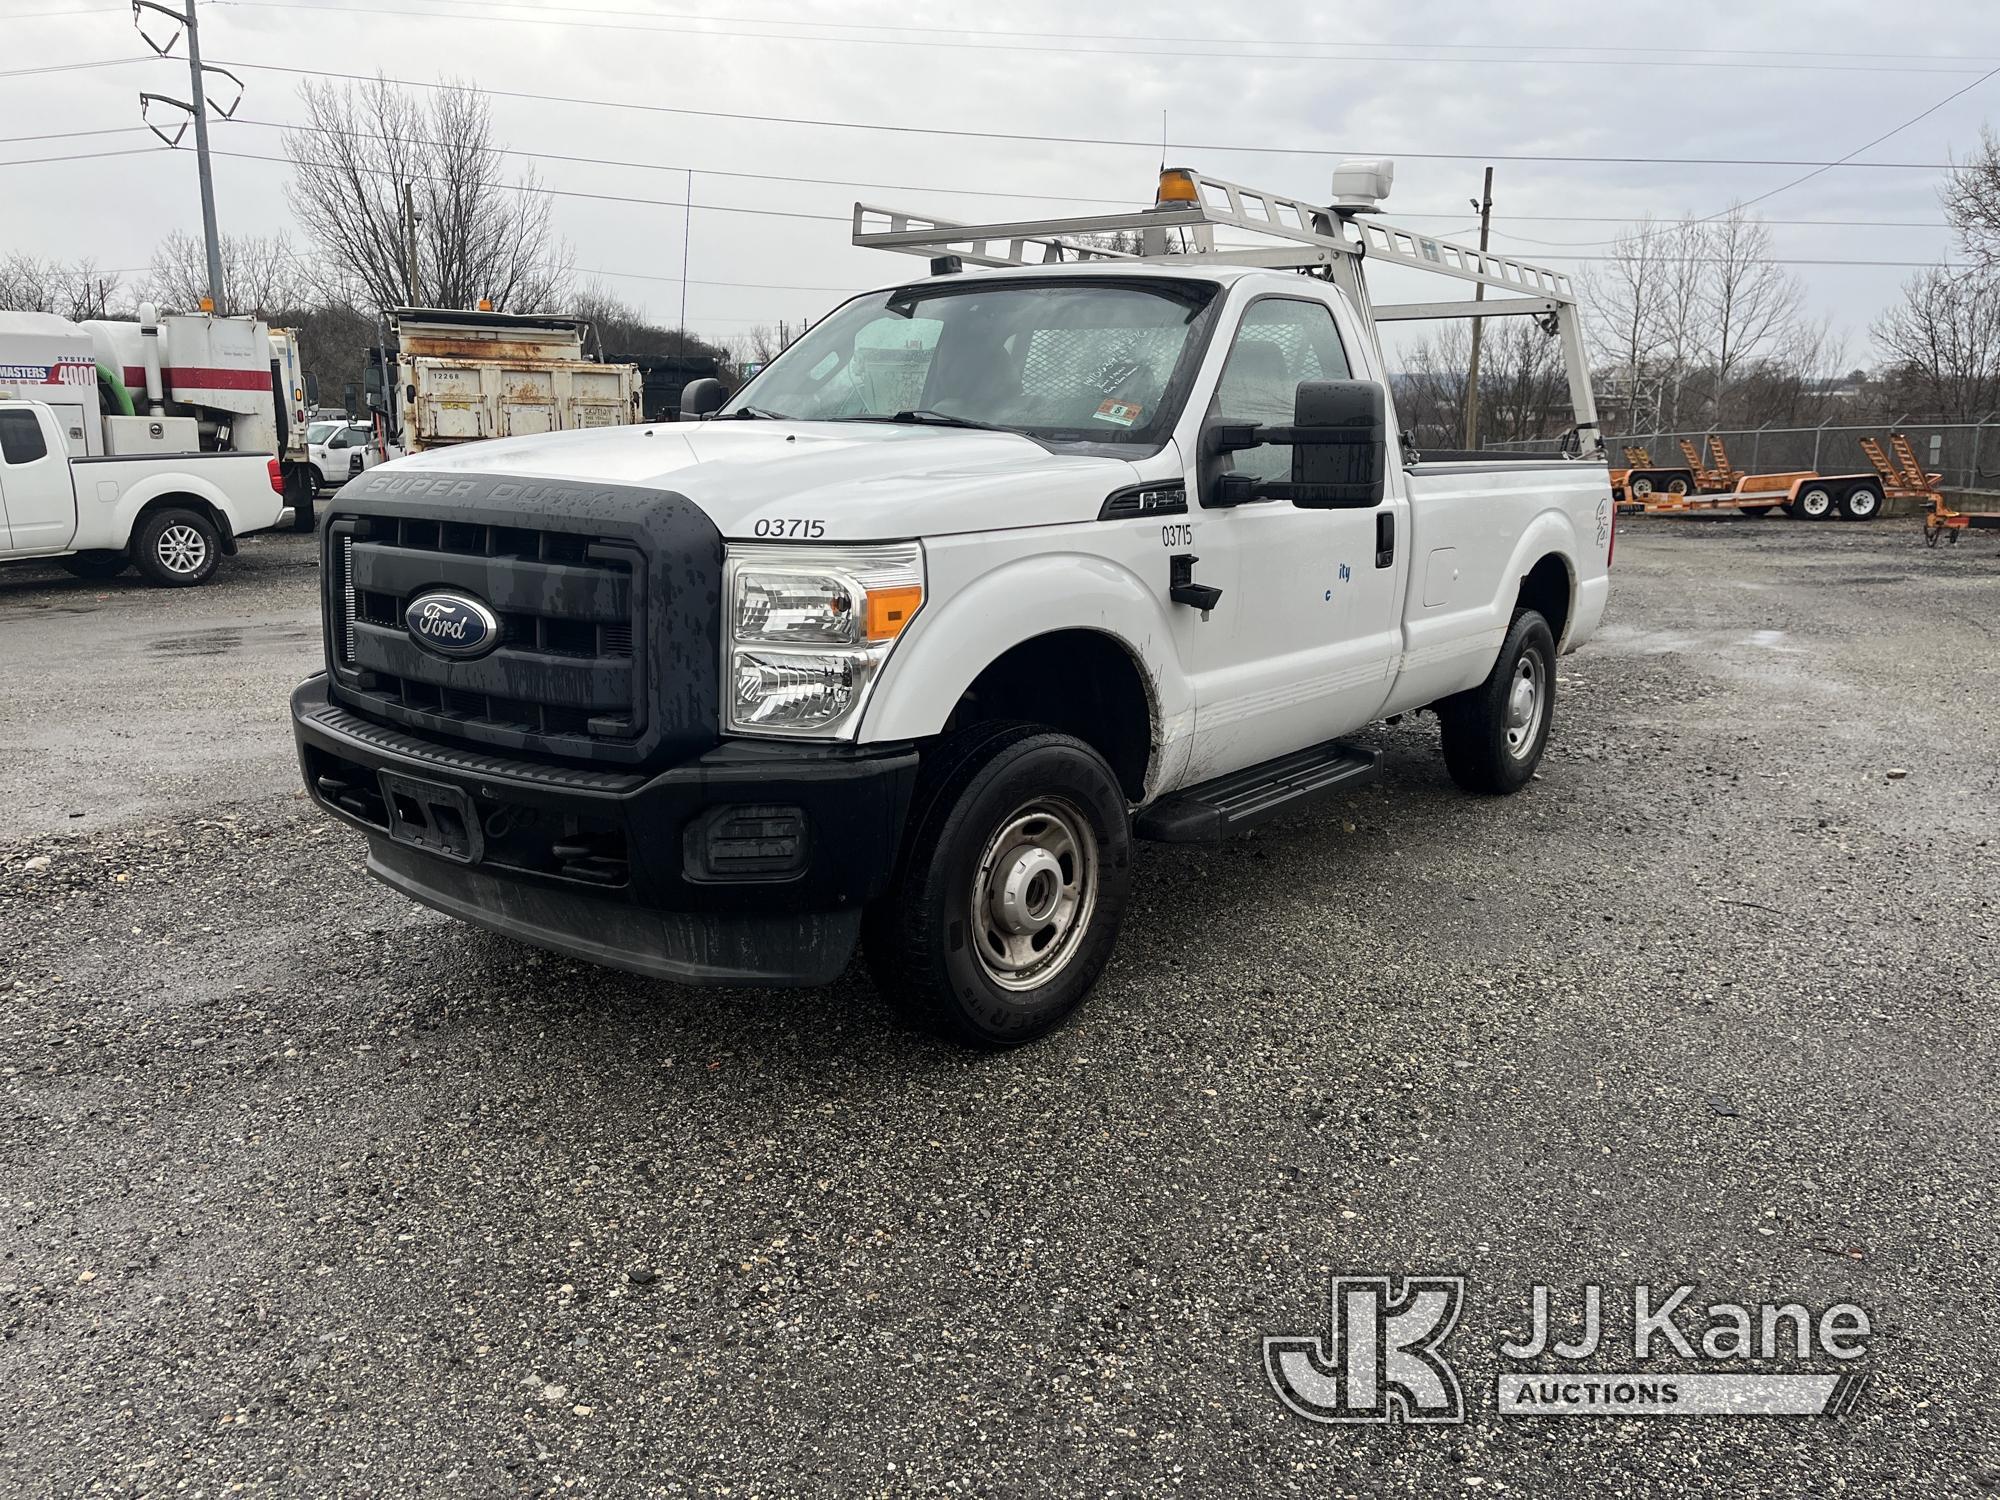 (Plymouth Meeting, PA) 2012 Ford F250 Pickup Truck Runs & Moves, Body & Rust Damage